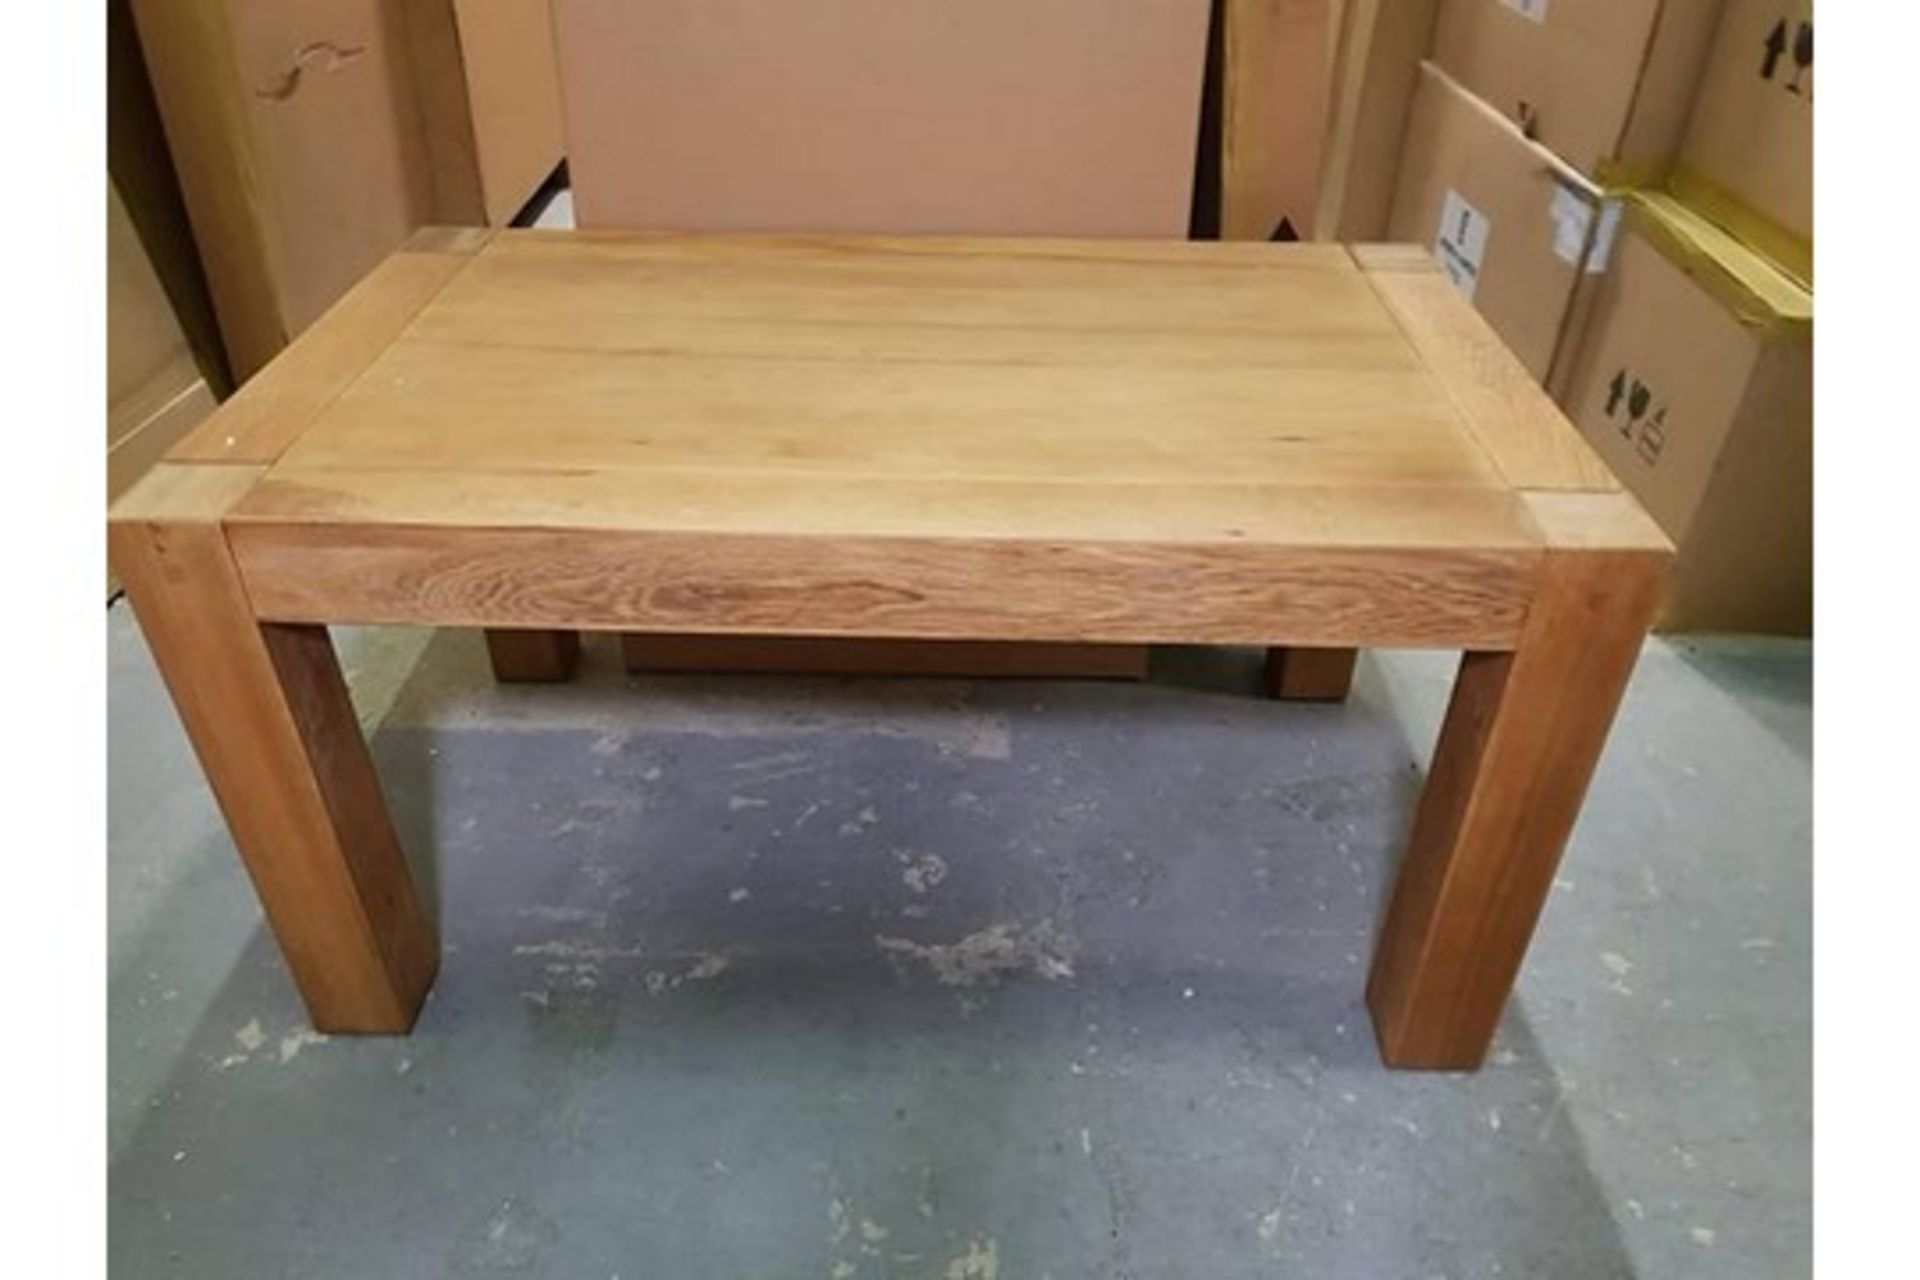 Oregon Natural Solid Oak Dining Table The Oregon Is Produced By Hand And Made As A Bespoke Item Of